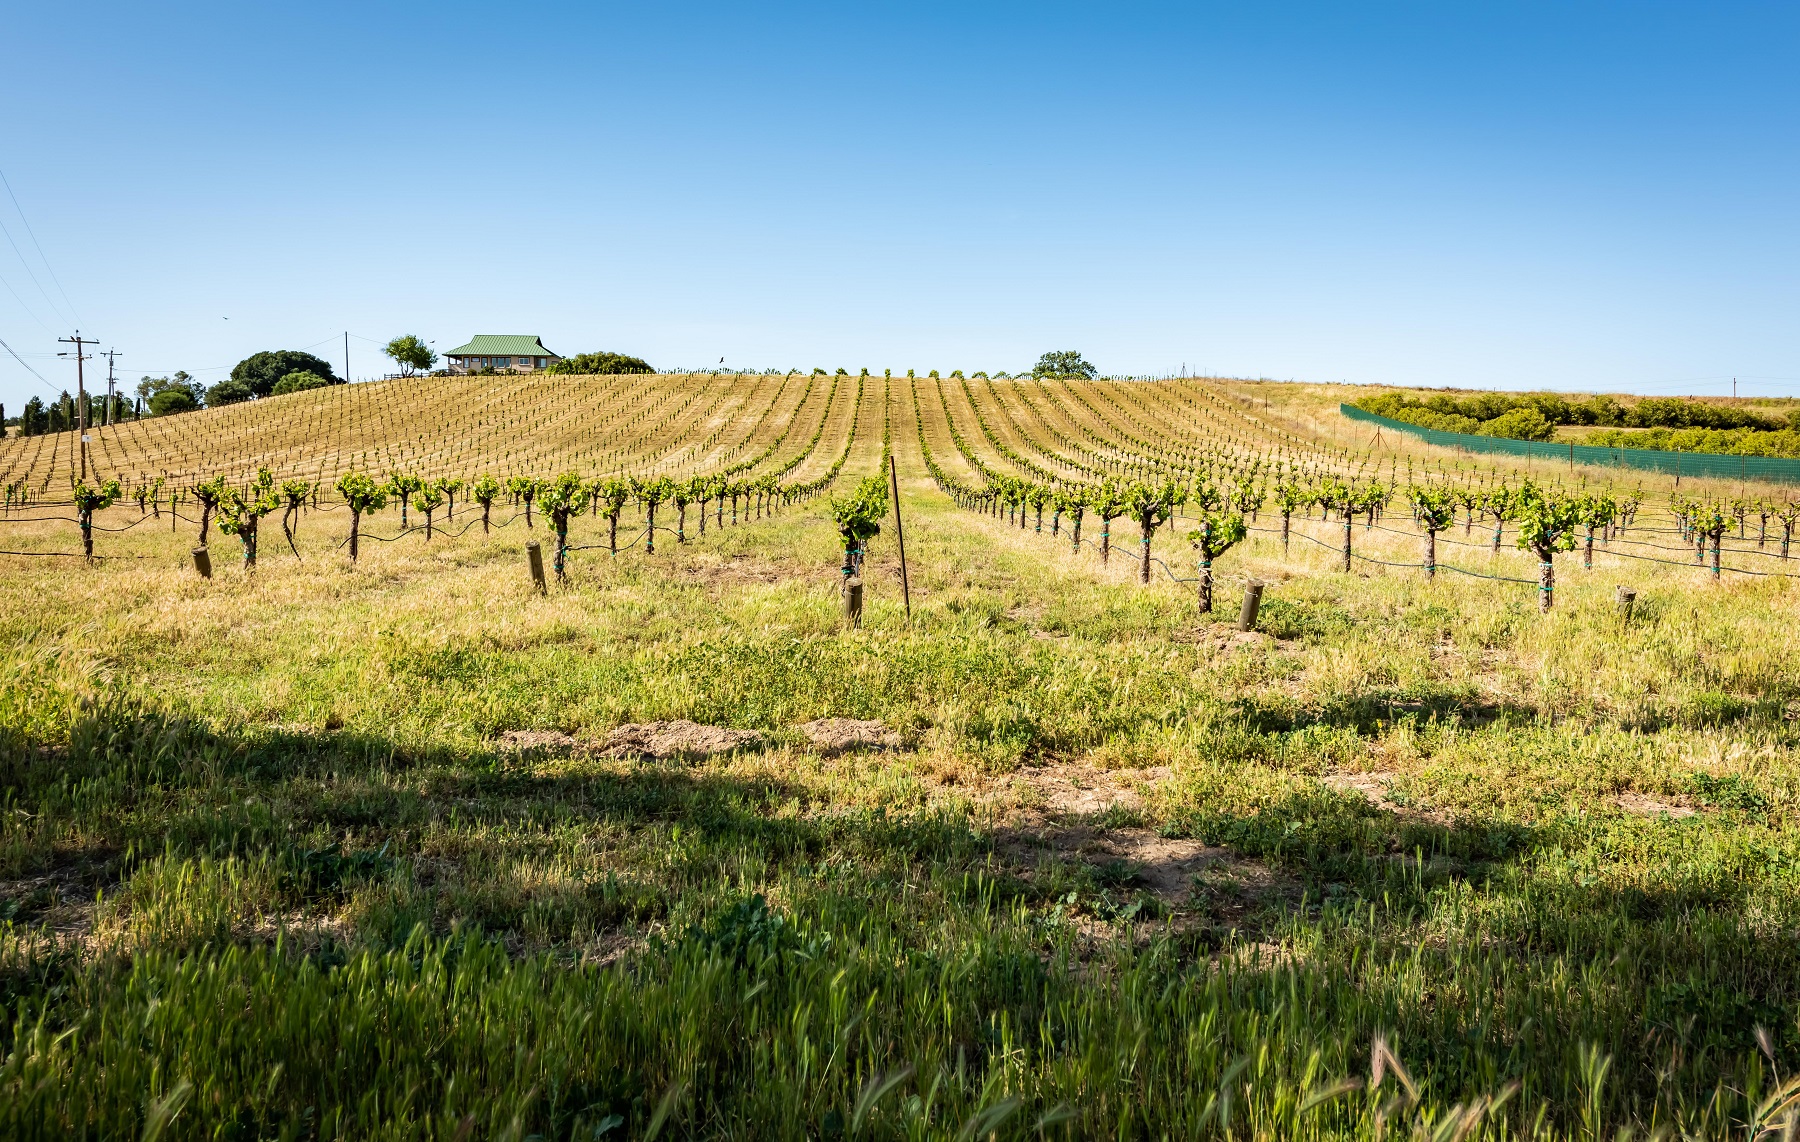 Nestled in a working vineyard and surrounded by 14 acres of wine grapes.